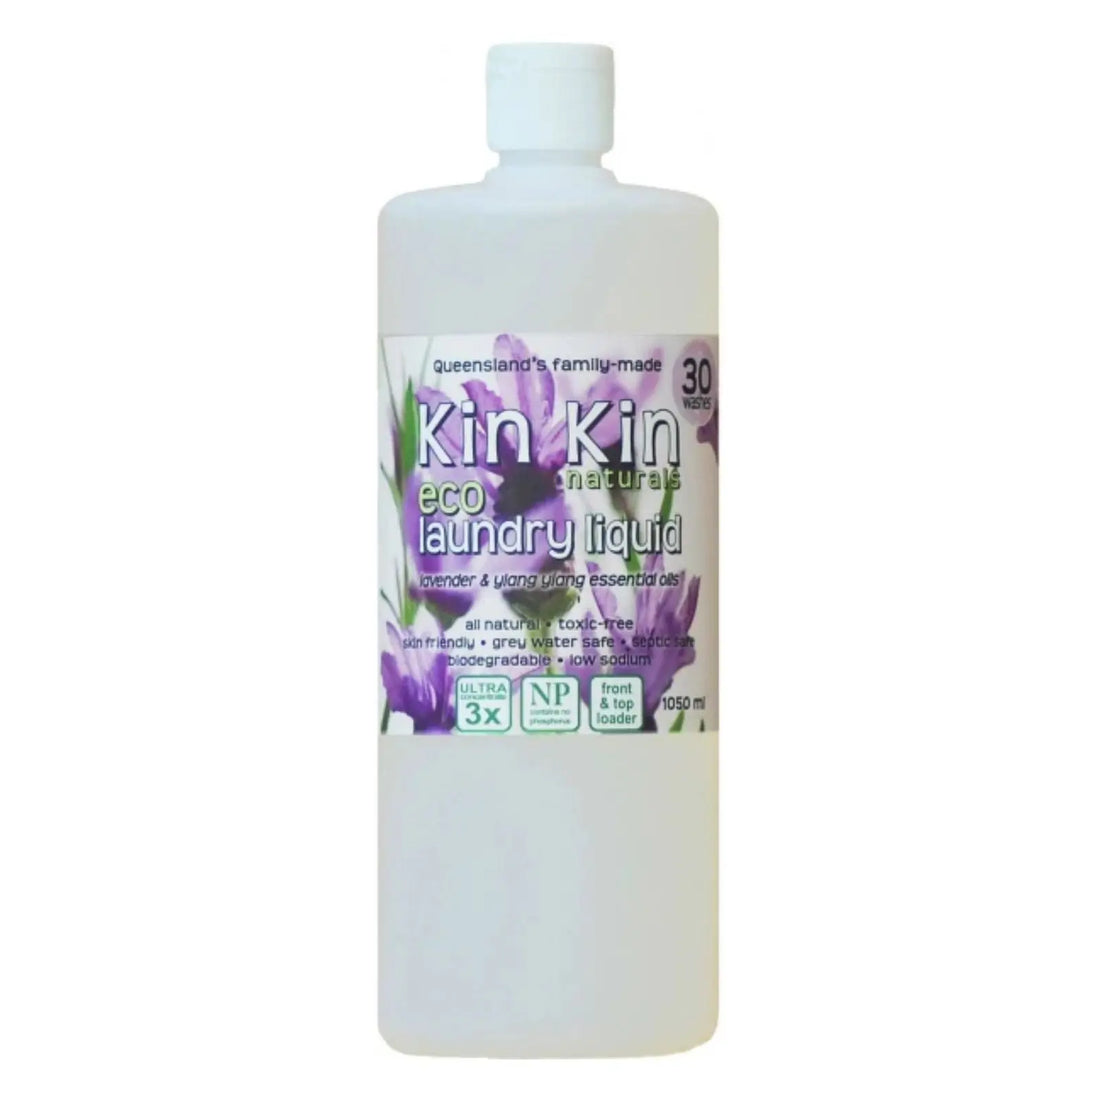 Laundry Liquid Lavender & Ylang Ylang 1.05 litre-Household-Kin Kin Naturals-Sovereign Foods-Cleaning-Australian Made